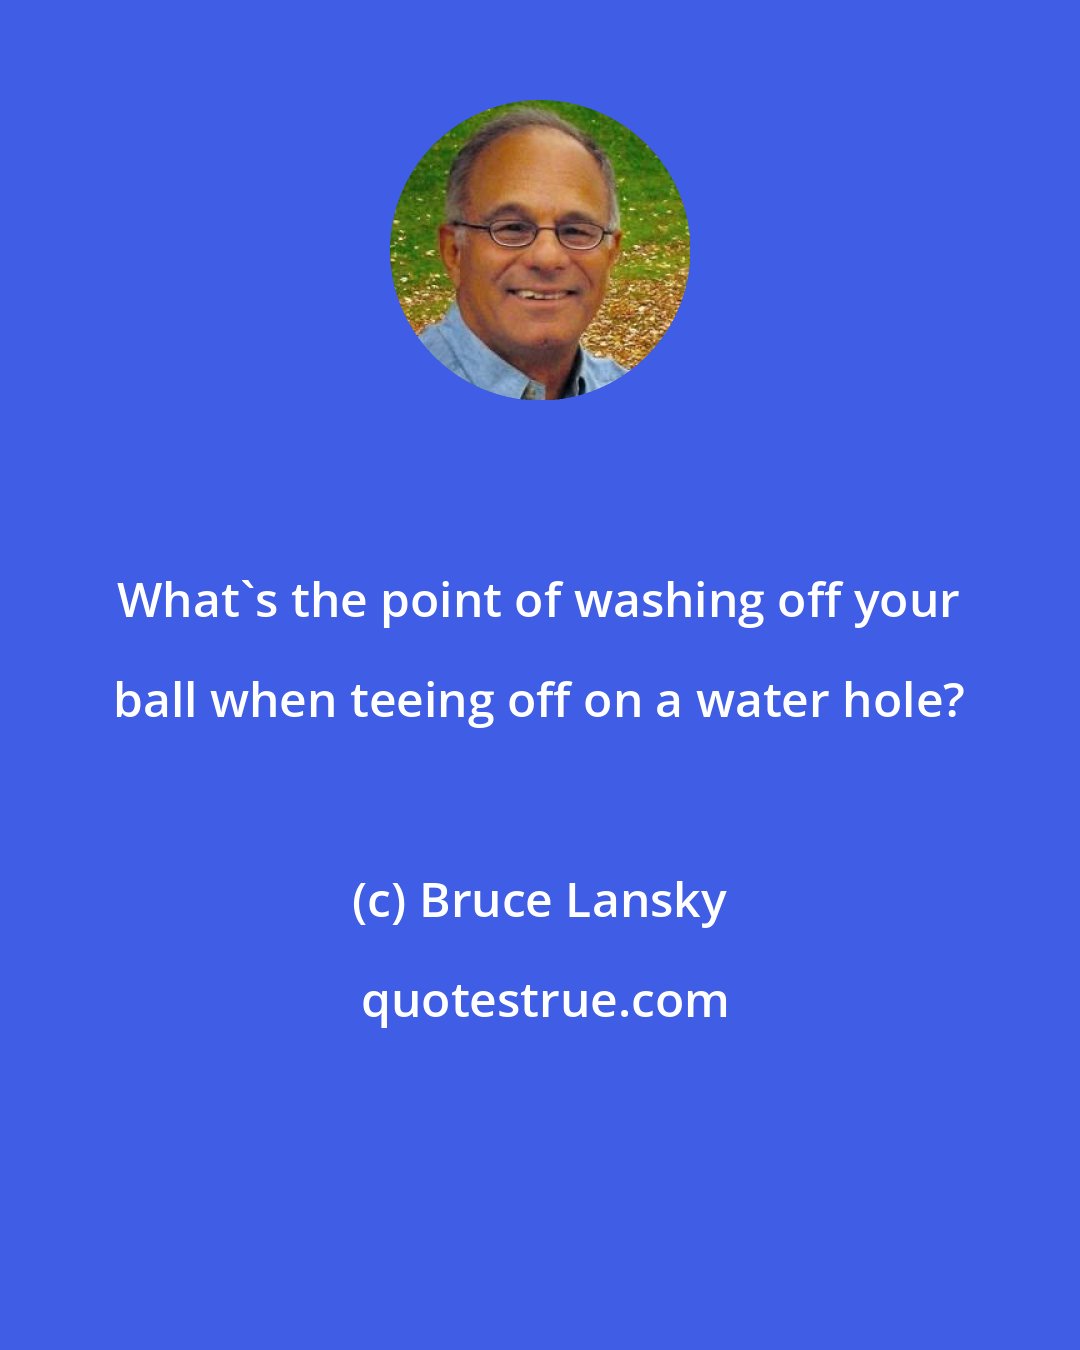 Bruce Lansky: What's the point of washing off your ball when teeing off on a water hole?